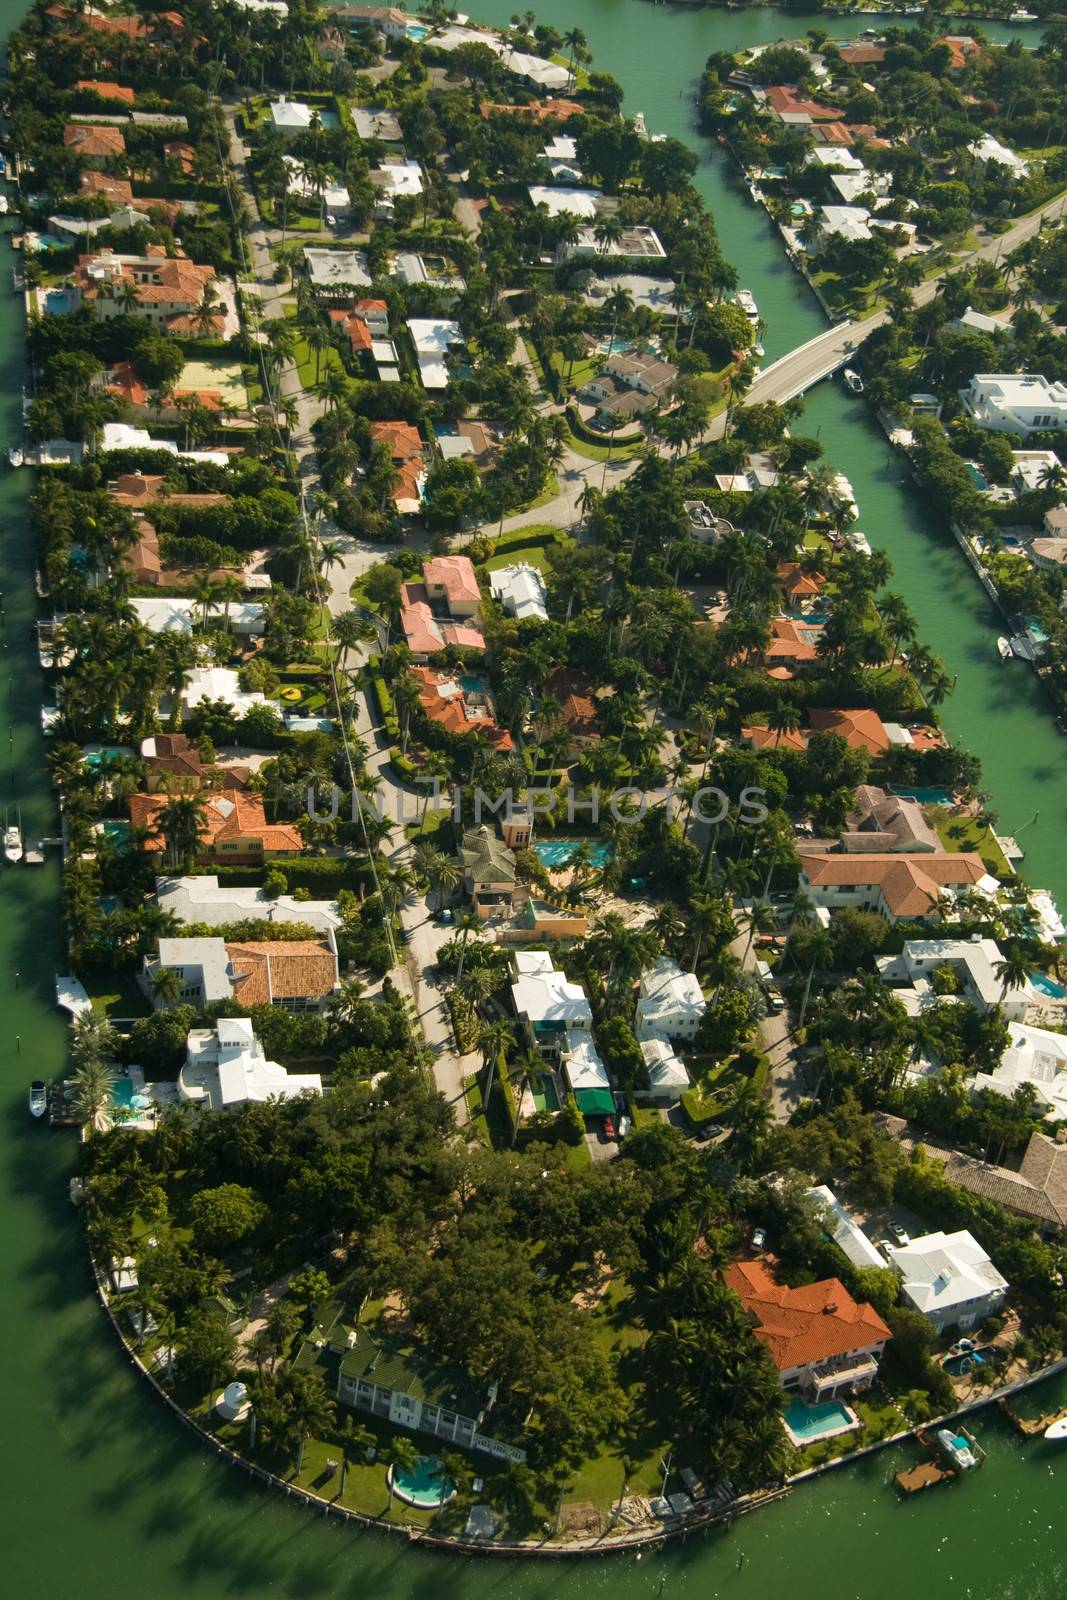 Aerial view of buildings at the waterfront, Miami, Florida, USA